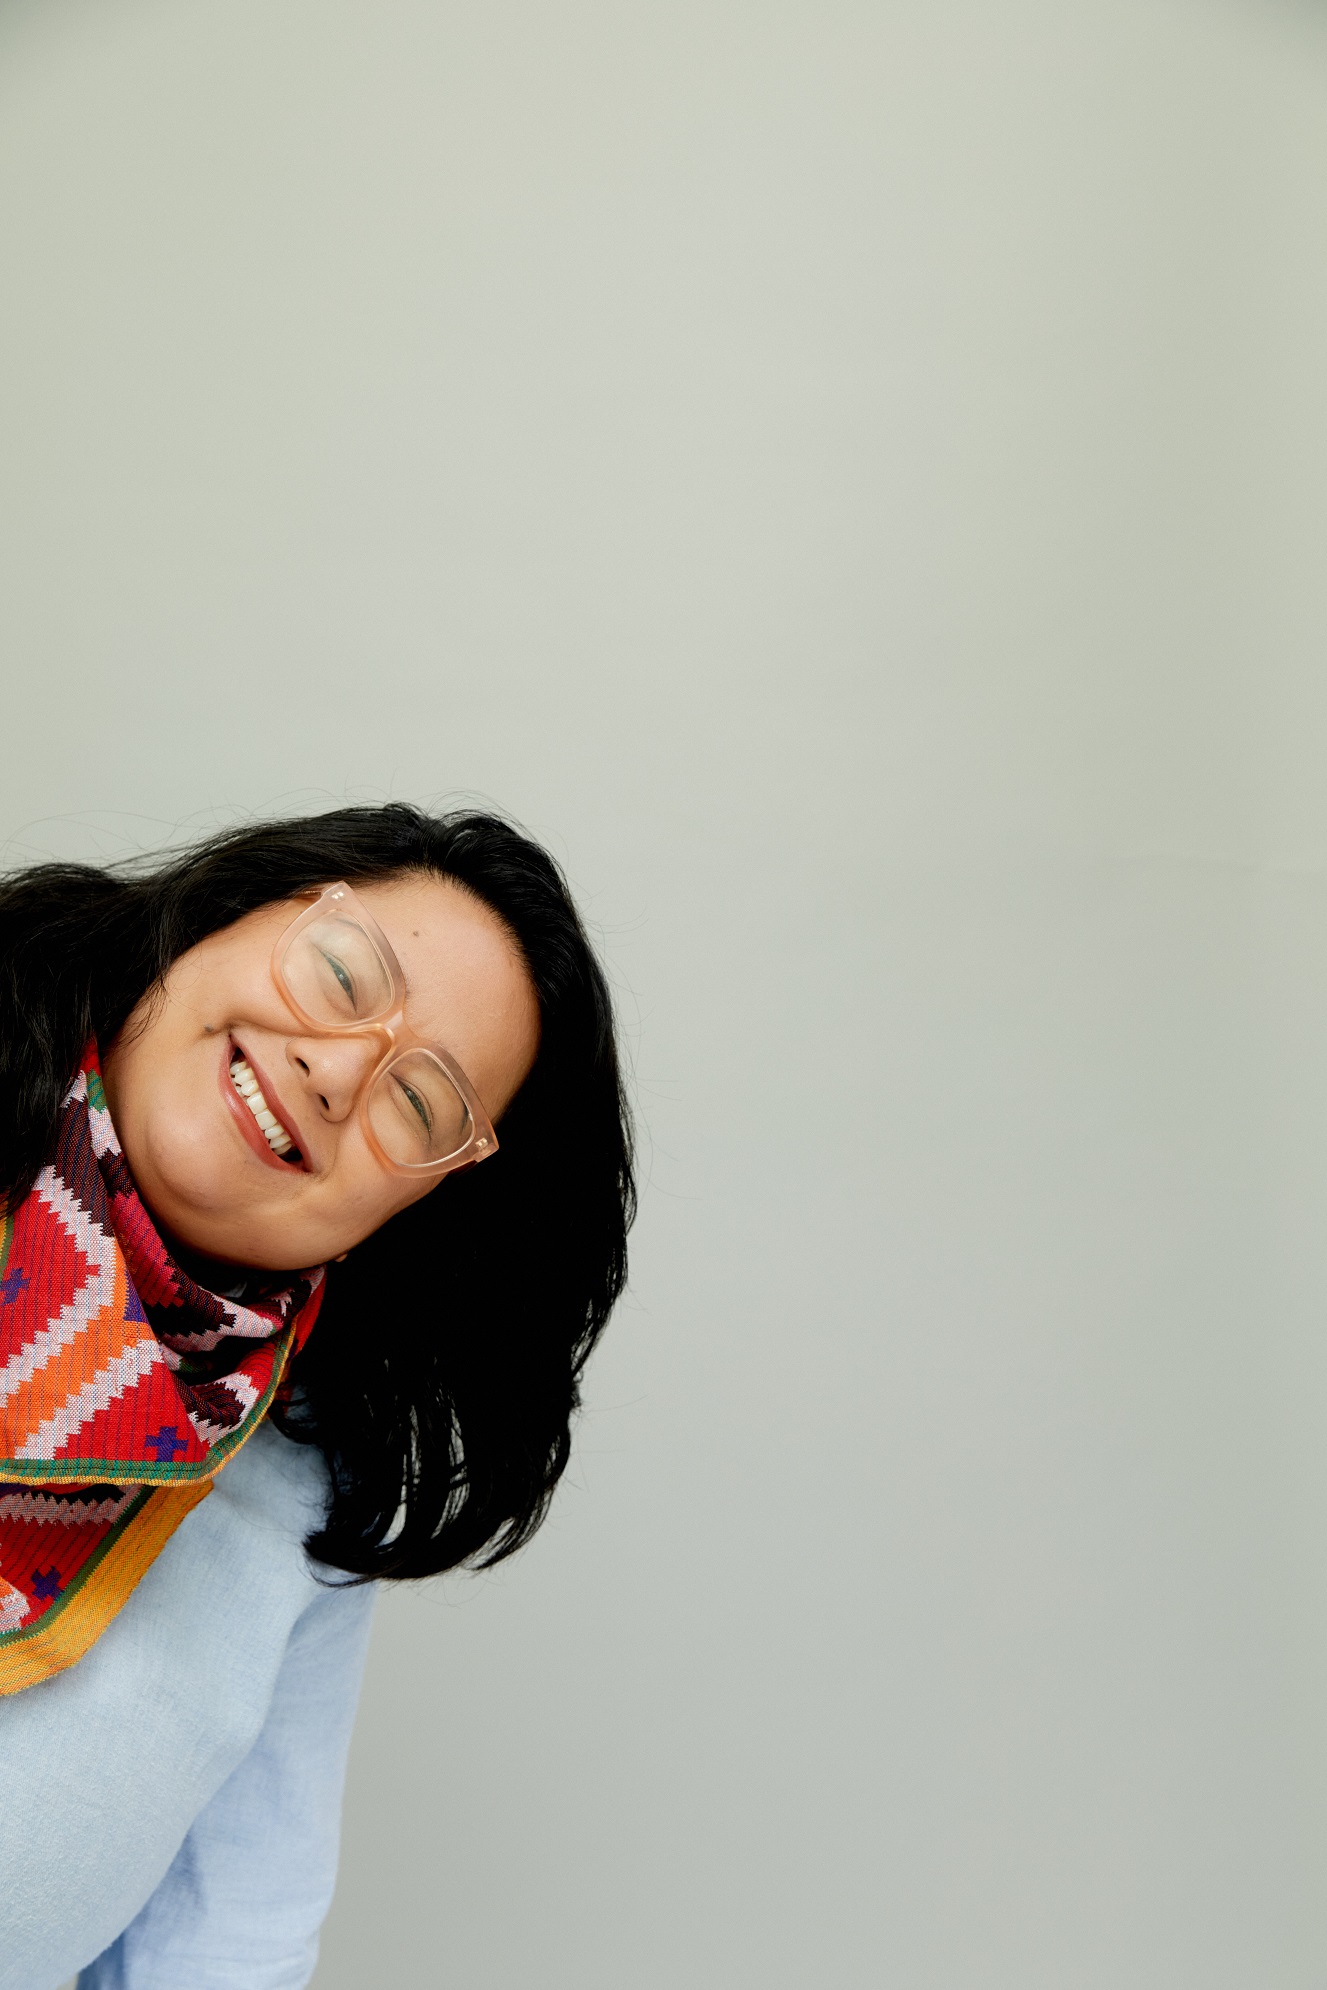 Alia is a Filipina woman standing in front of a grey background. She has black, shoulder-length hair, and is wearing glasses with light pink, transparent frames. She is wearing a light blue shirt and a scarf made from a textile that is red, white, orange, blue, green, and yellow. She is smiling and leaning in from the left side, as if she’s peeking her head in to say hello.